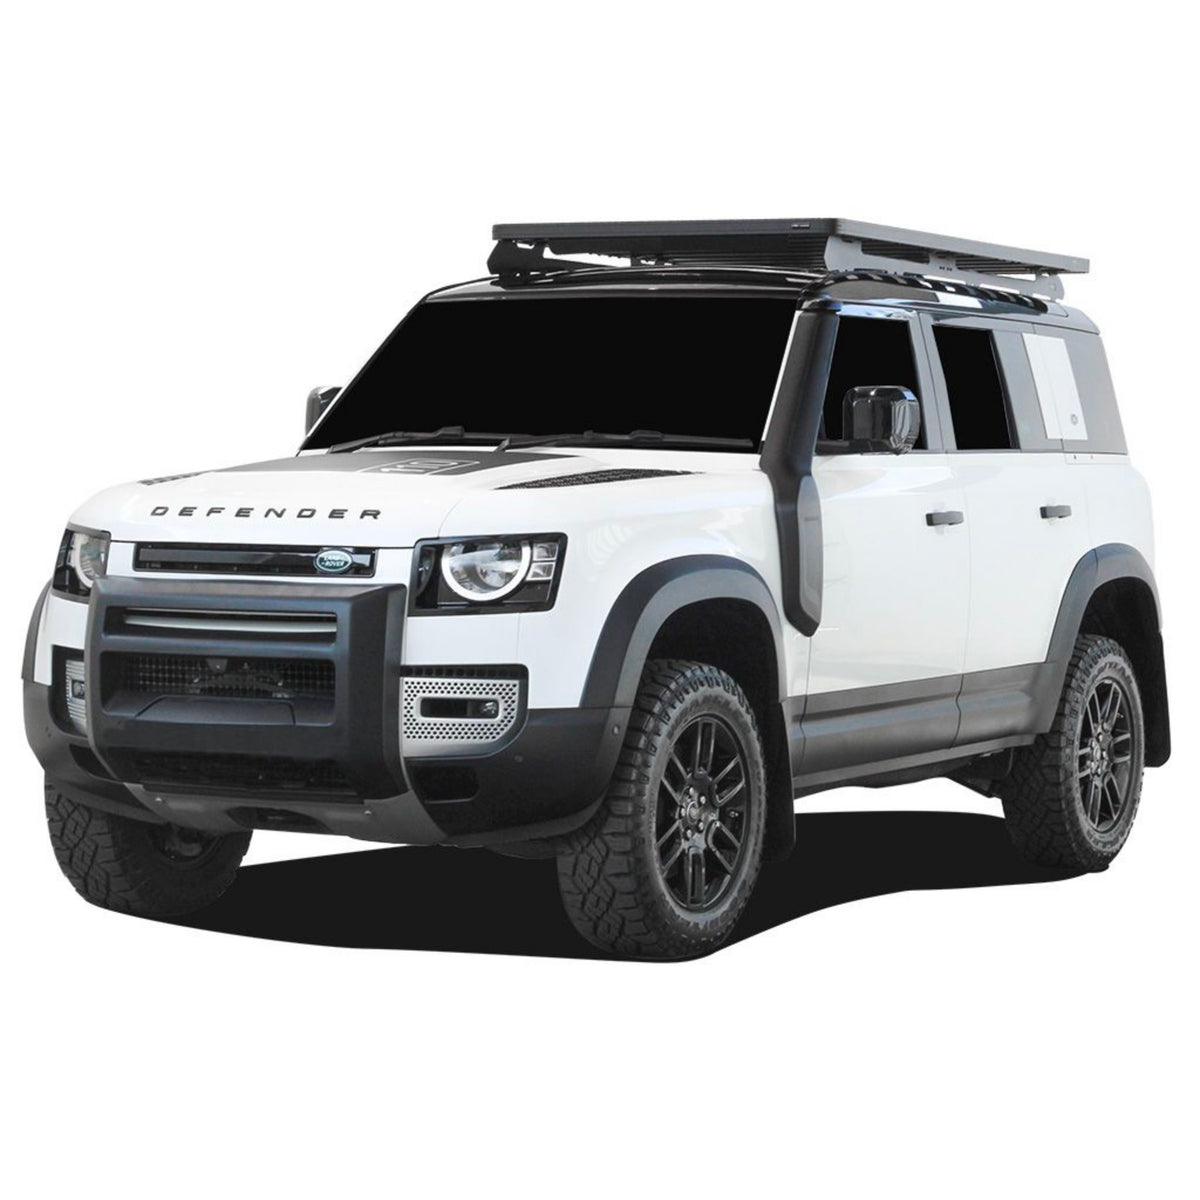 Your defender. Land Rover Green White Roof. Front Runner.